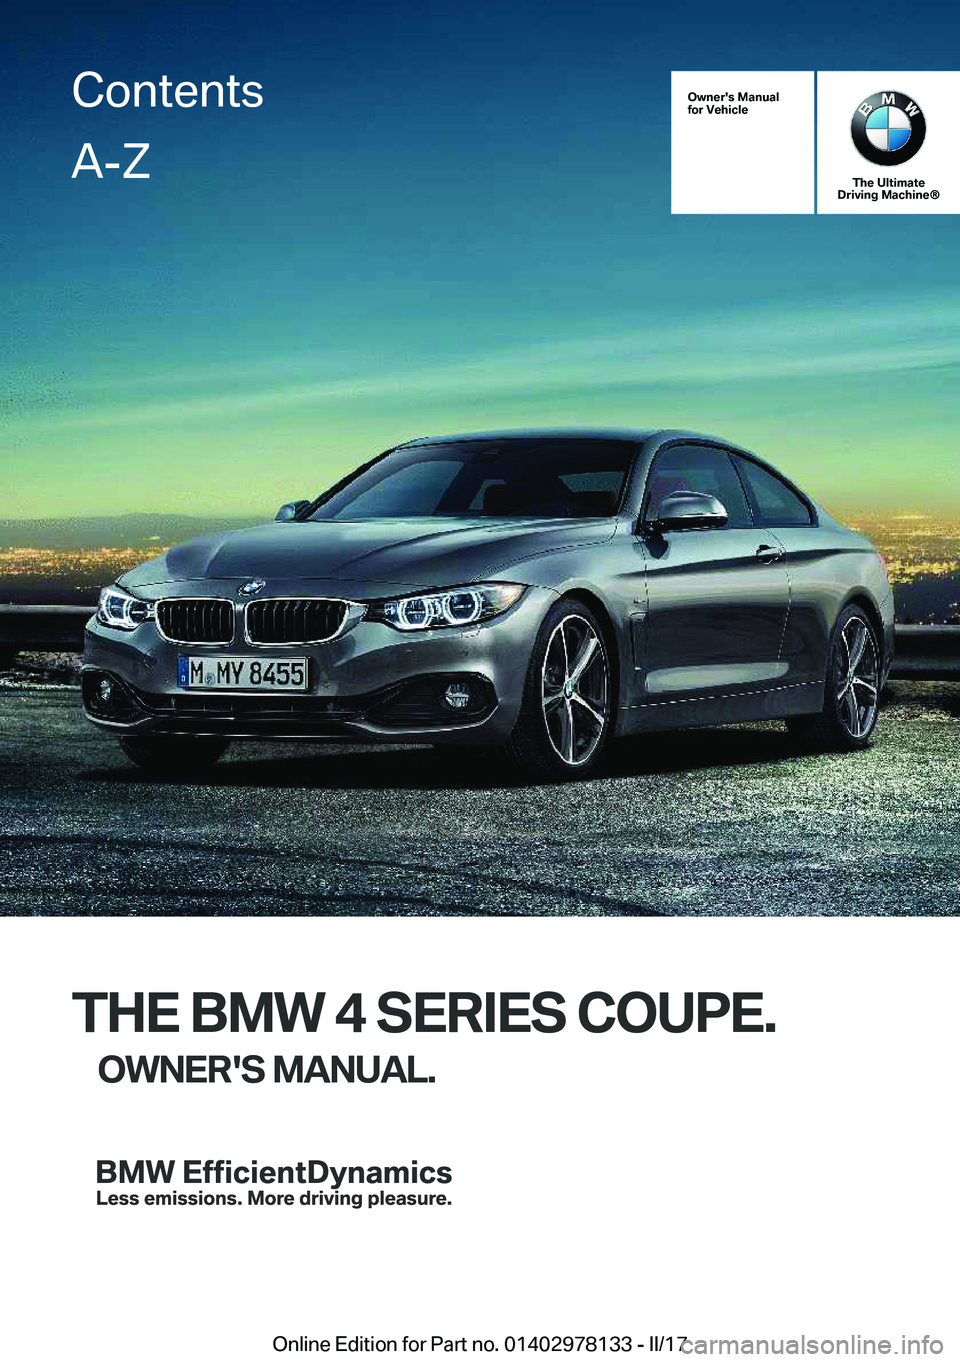 BMW 4 SERIES COUPE 2018  Owners Manual �O�w�n�e�r�'�s��M�a�n�u�a�l
�f�o�r��V�e�h�i�c�l�e
�T�h�e��U�l�t�i�m�a�t�e
�D�r�i�v�i�n�g��M�a�c�h�i�n�e�n
�T�H�E��B�M�W��4��S�E�R�I�E�S��C�O�U�P�E�.
�O�W�N�E�R�'�S��M�A�N�U�A�L�.
�C�o